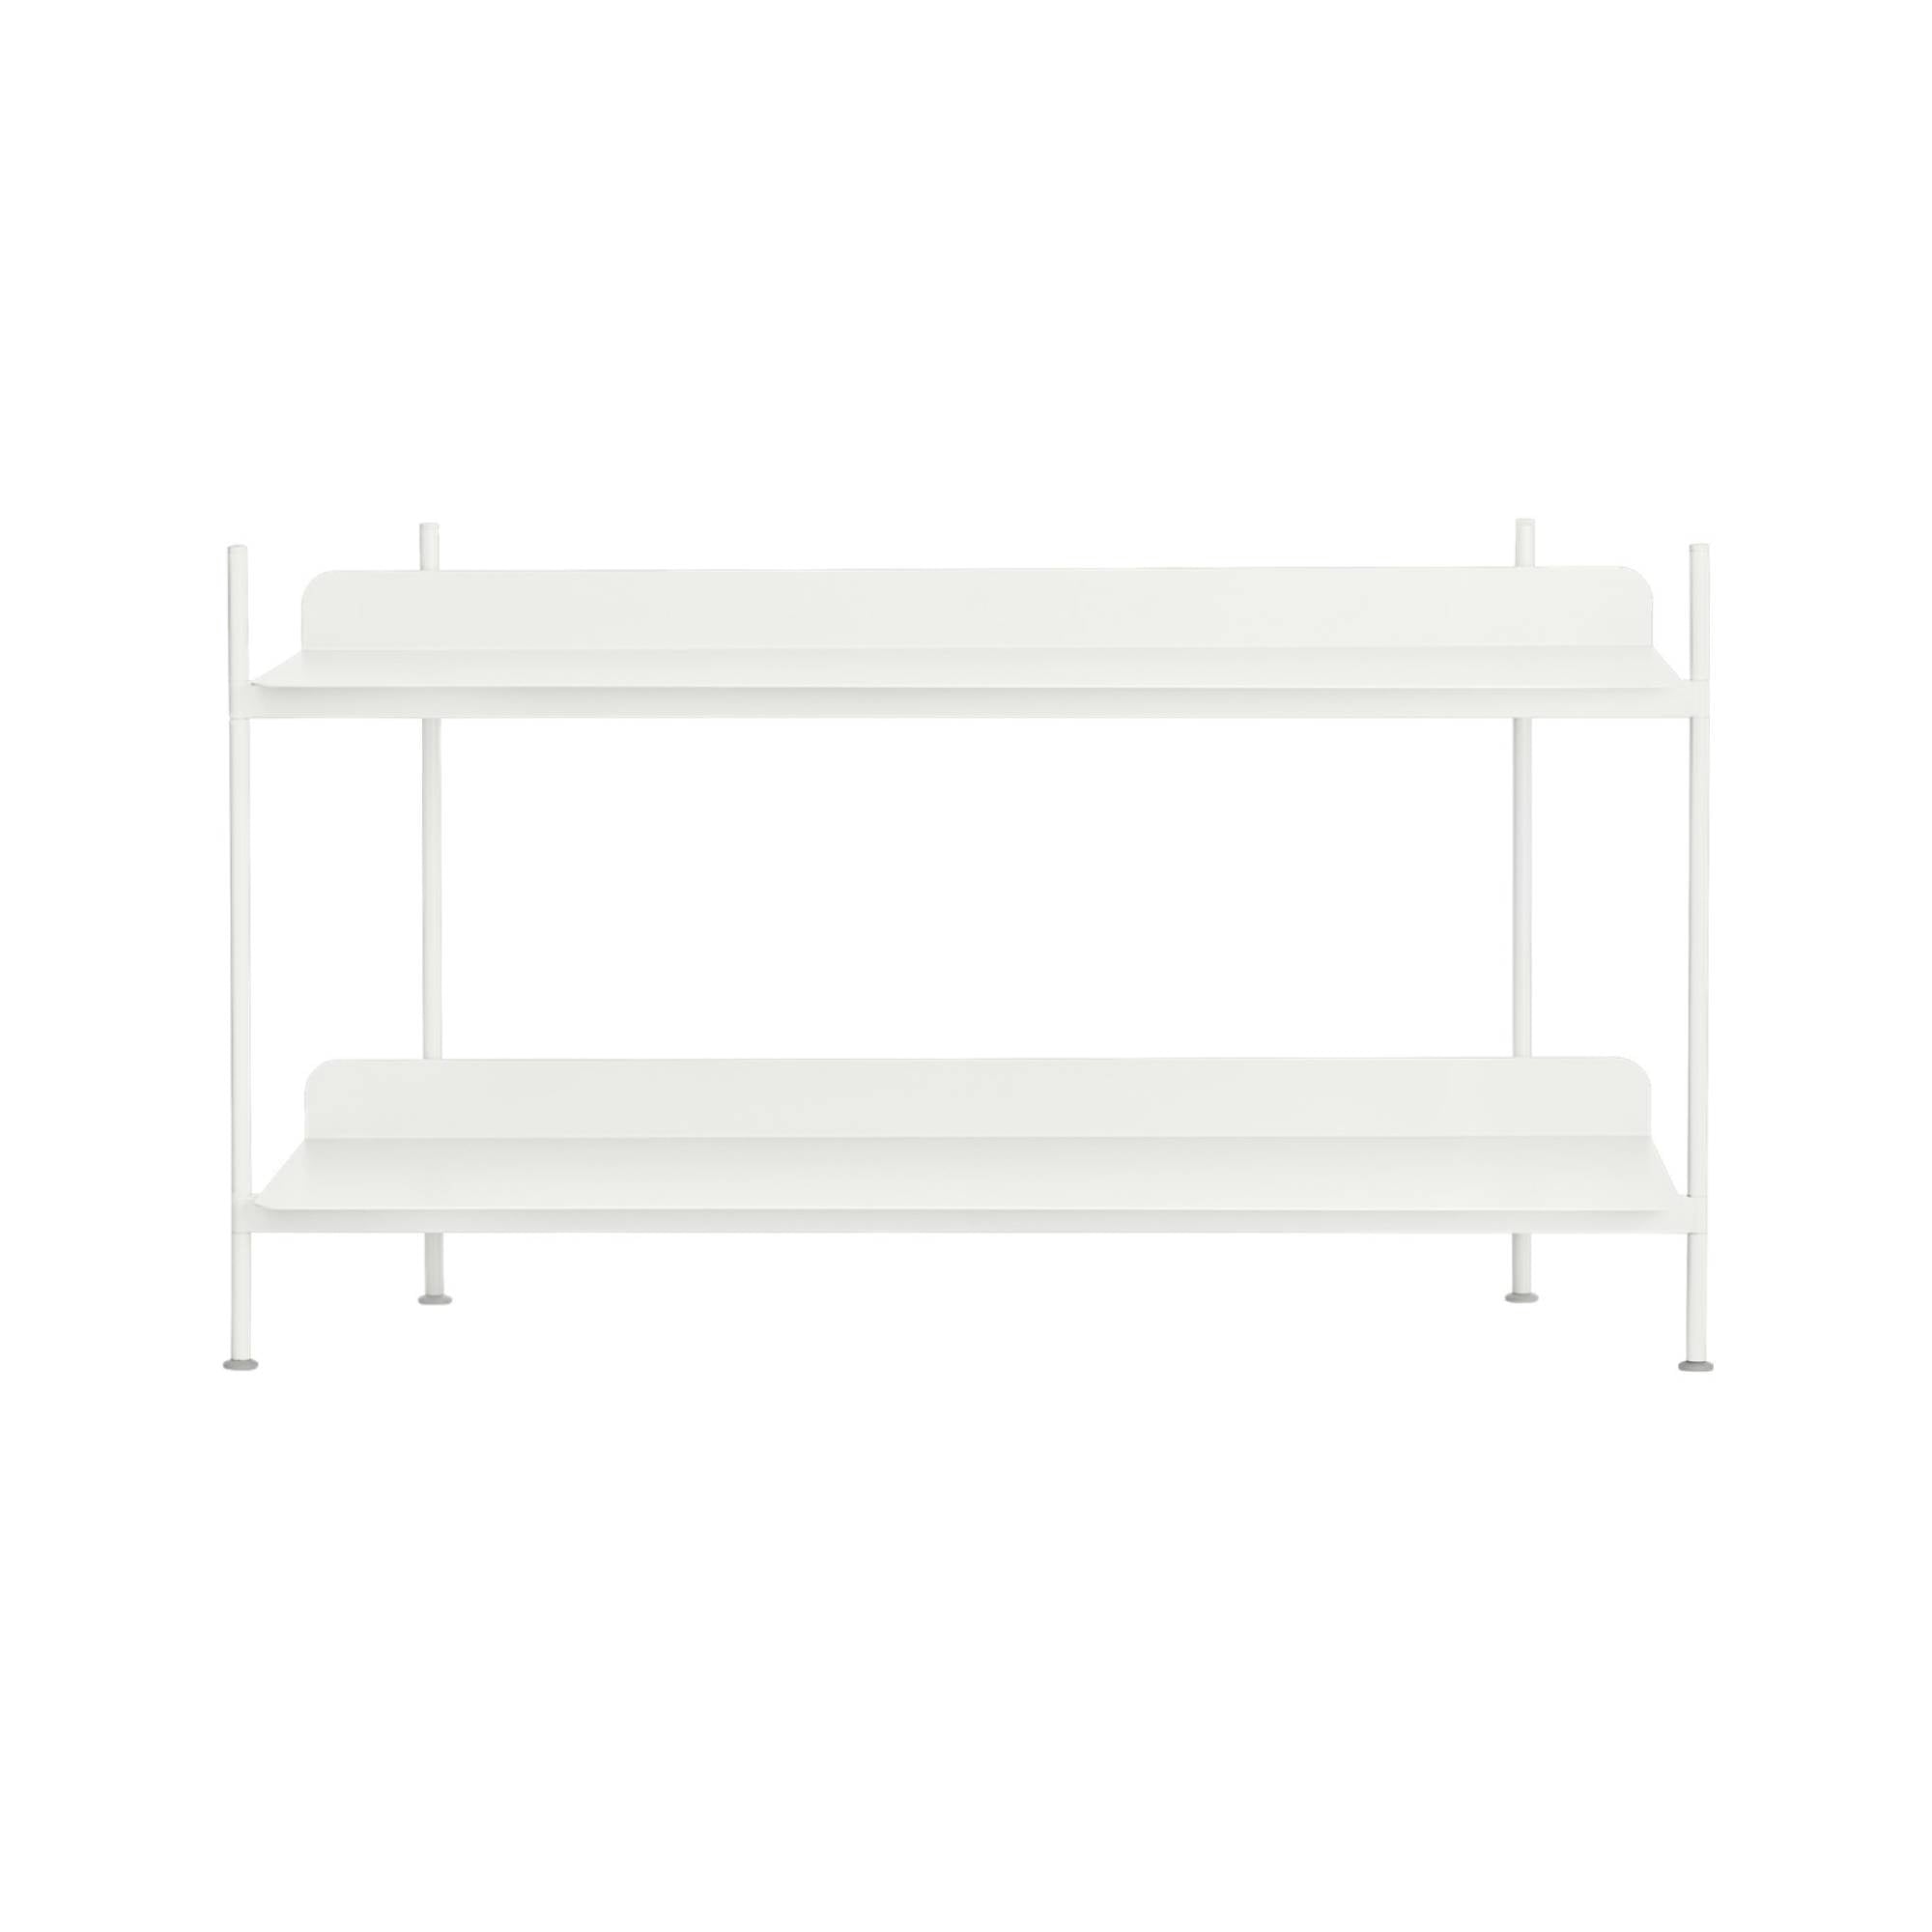 Compile Shelving System: Configuration 1 + White